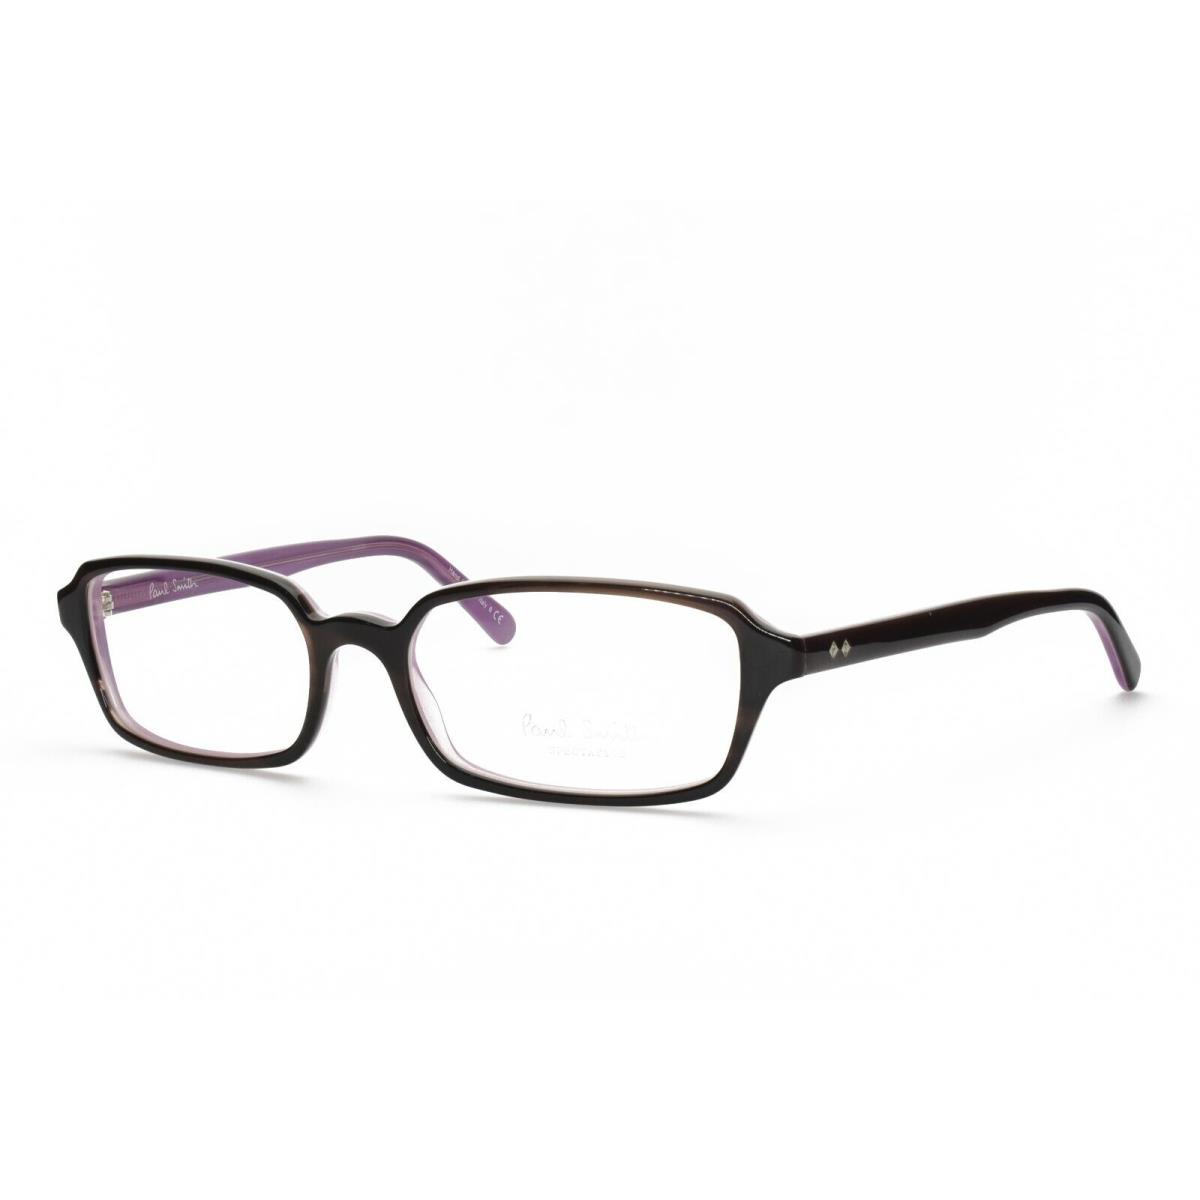 Paul Smith PS Wollaton 8078 1089 Eyeglasses Frames Only 50-17-140